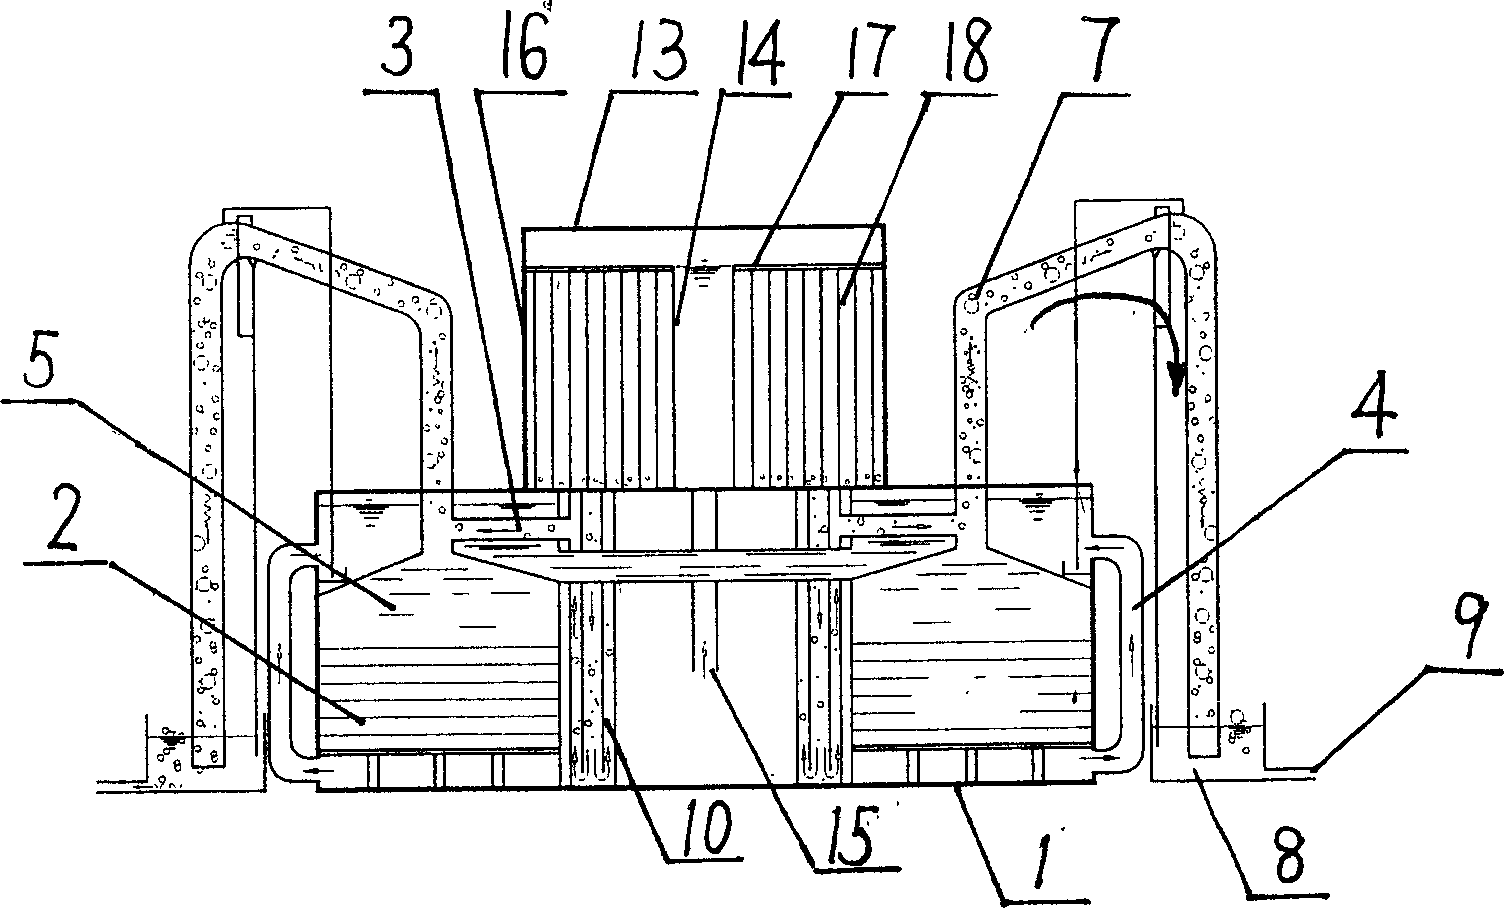 Apparatus and method for treating river and lake water